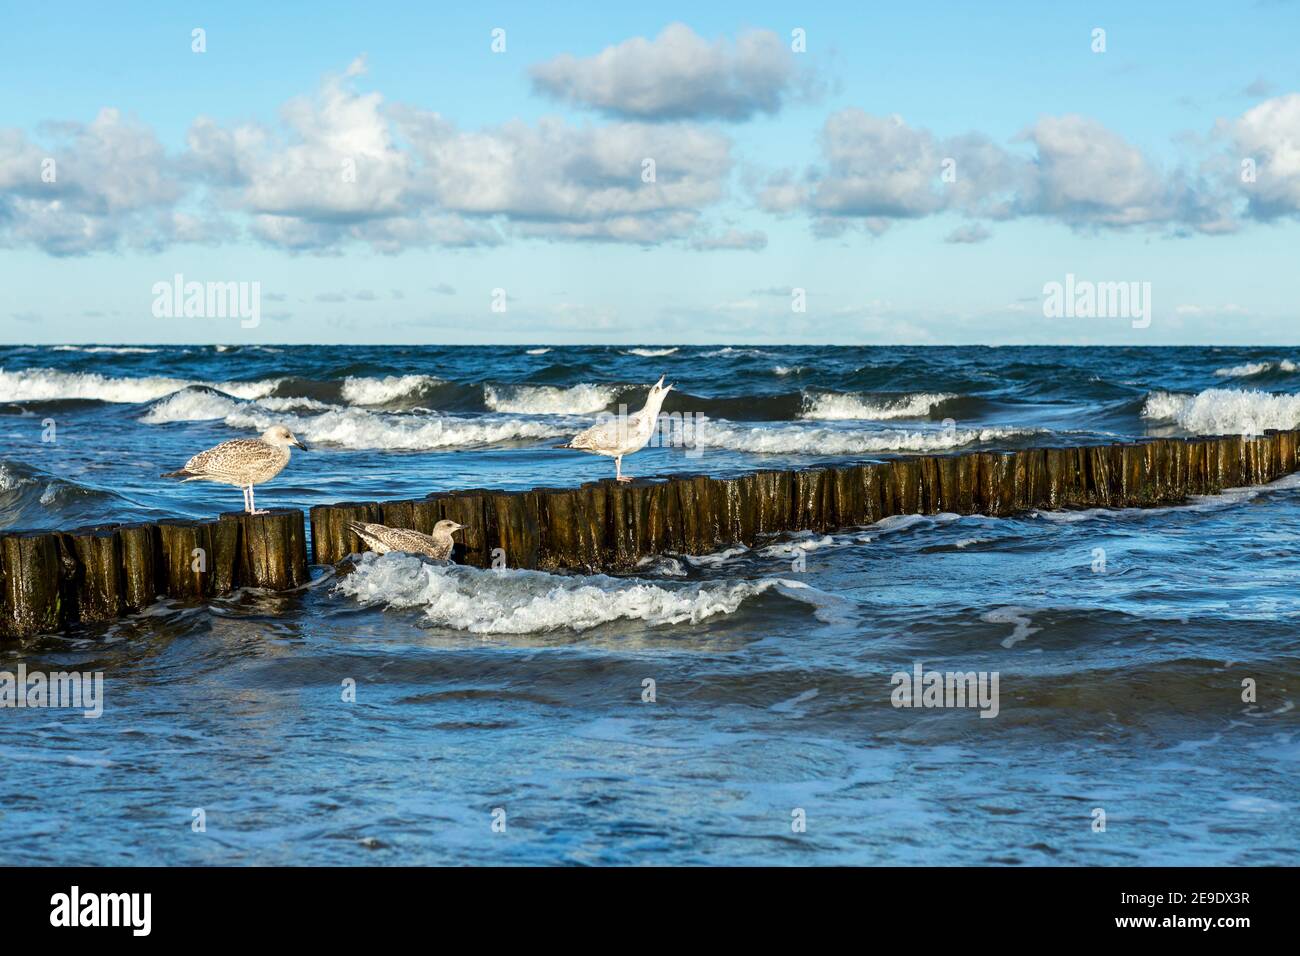 Three seagulls by the Baltic Sea in Germany Stock Photo